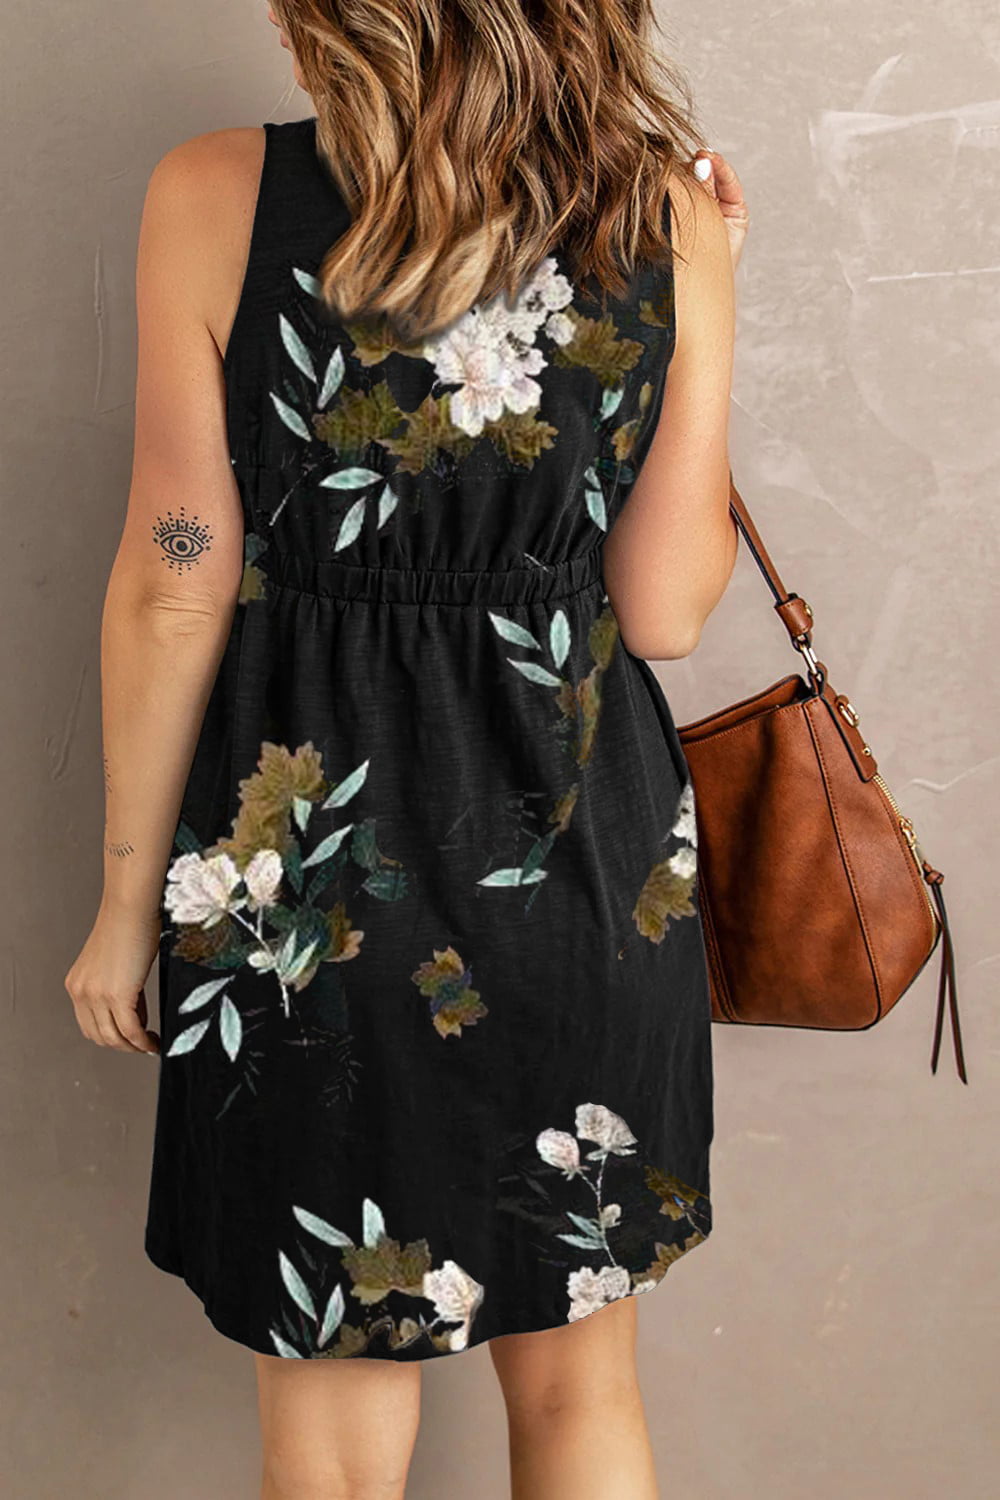 Experience the magic of fashion with our Crazy Thing Called Love dress. Featuring a unique scoop neck, sleeveless design, and convenient button closure, this dress is both stylish and functional